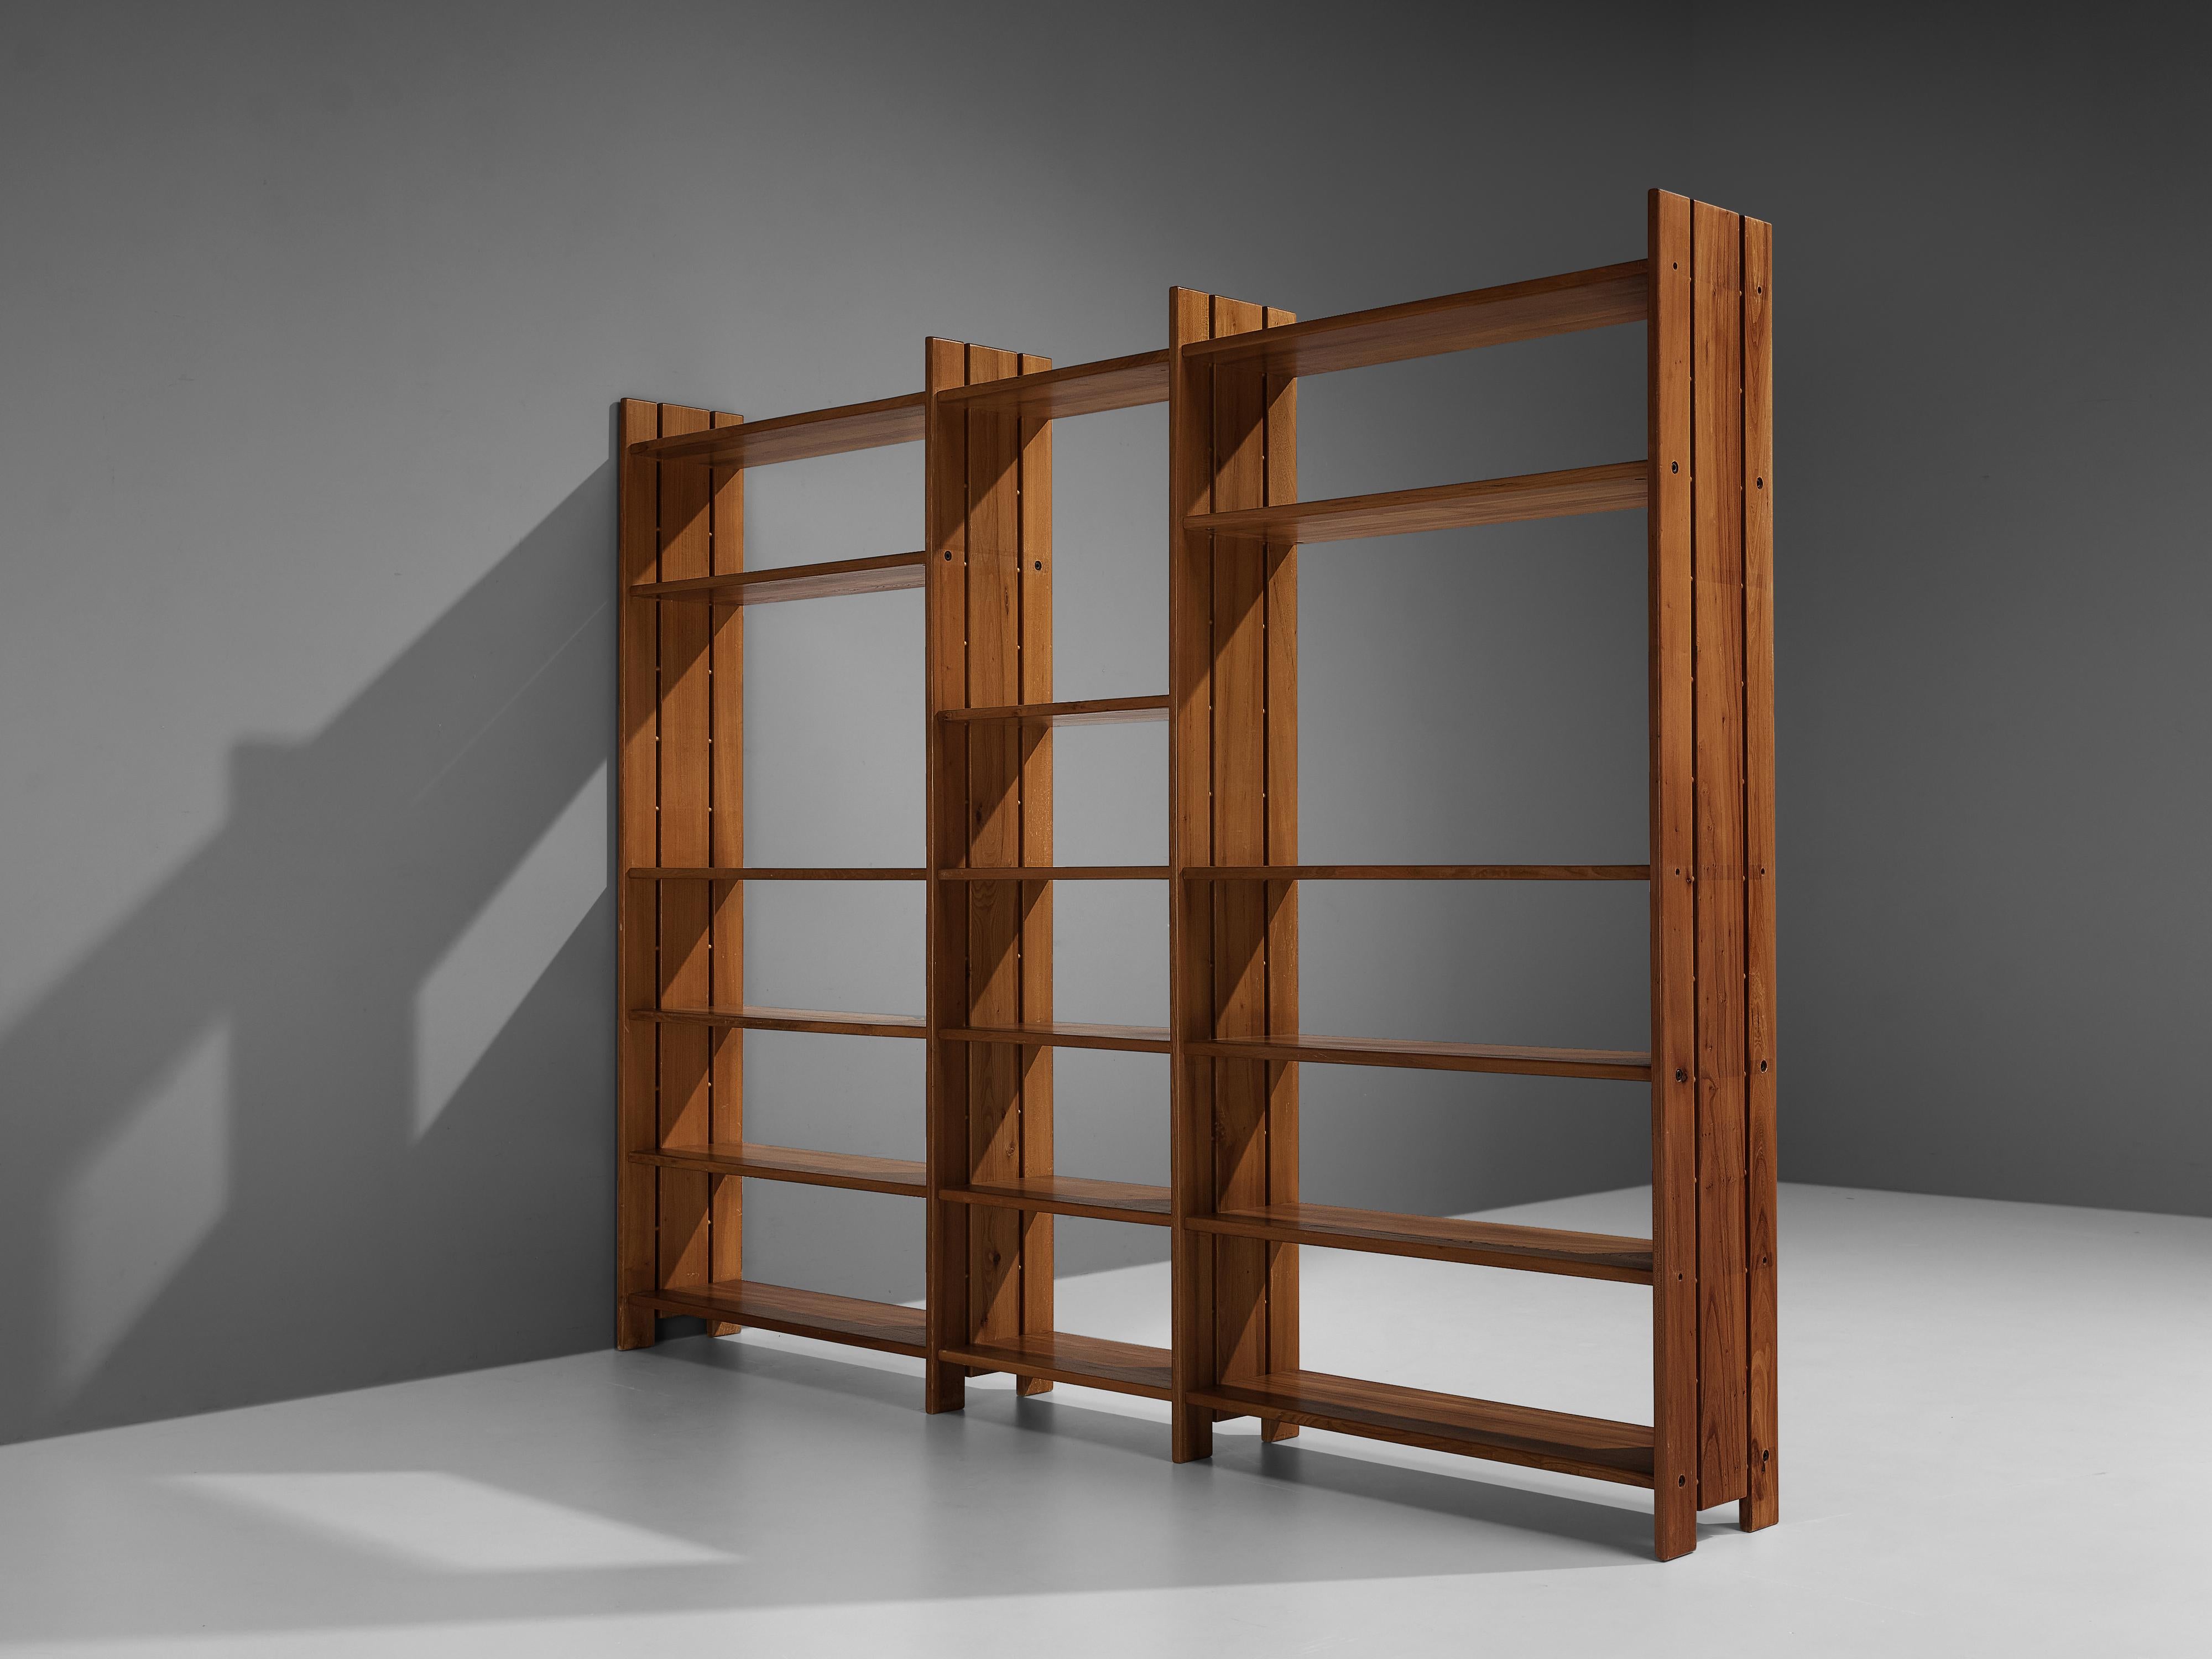 Maison Regain, bookshelf, solid elm, metal, France, 1970s

Free-standing bookshelf that can be placed facing a wall or used as a decorative room divider. In any case the design by Maison Regain features clean lines and allow you to showcase your